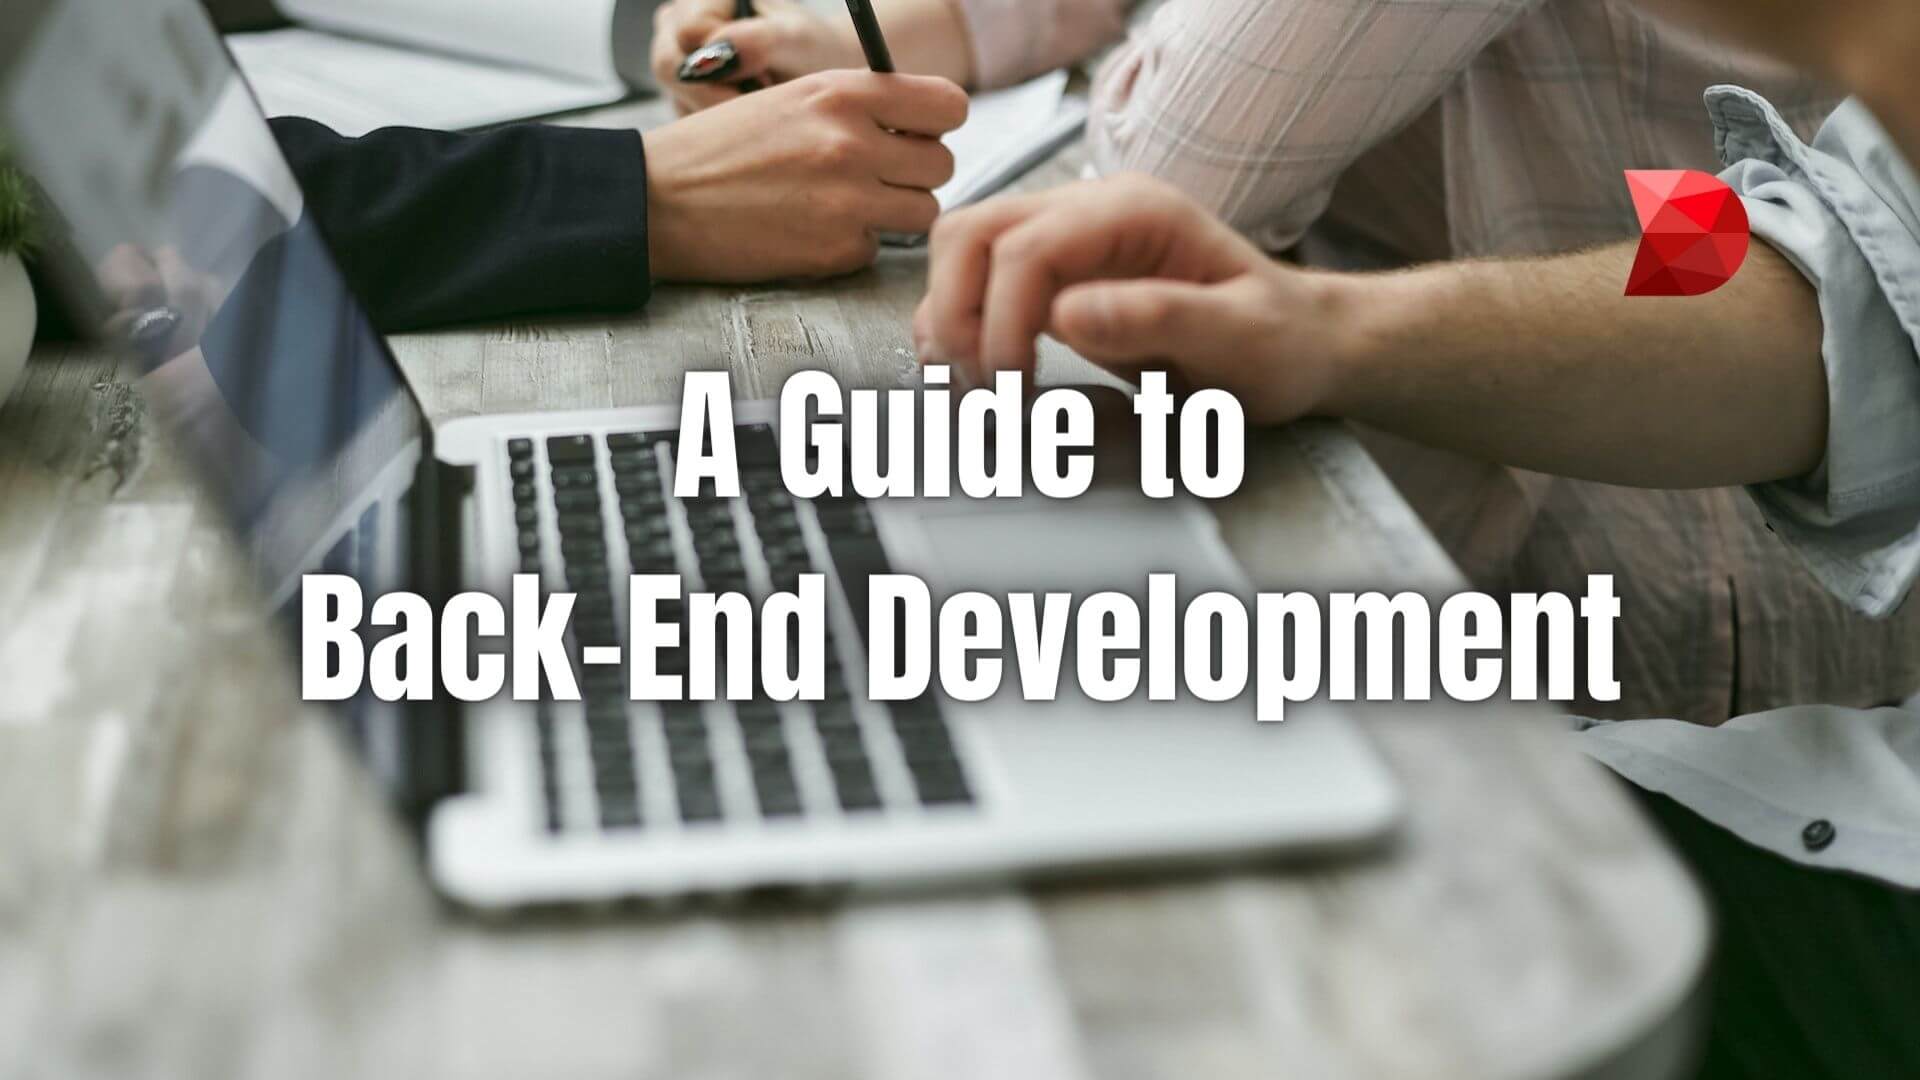 Back-end development is necessary when creating online applications that need server-side data processing and storage. Learn more!